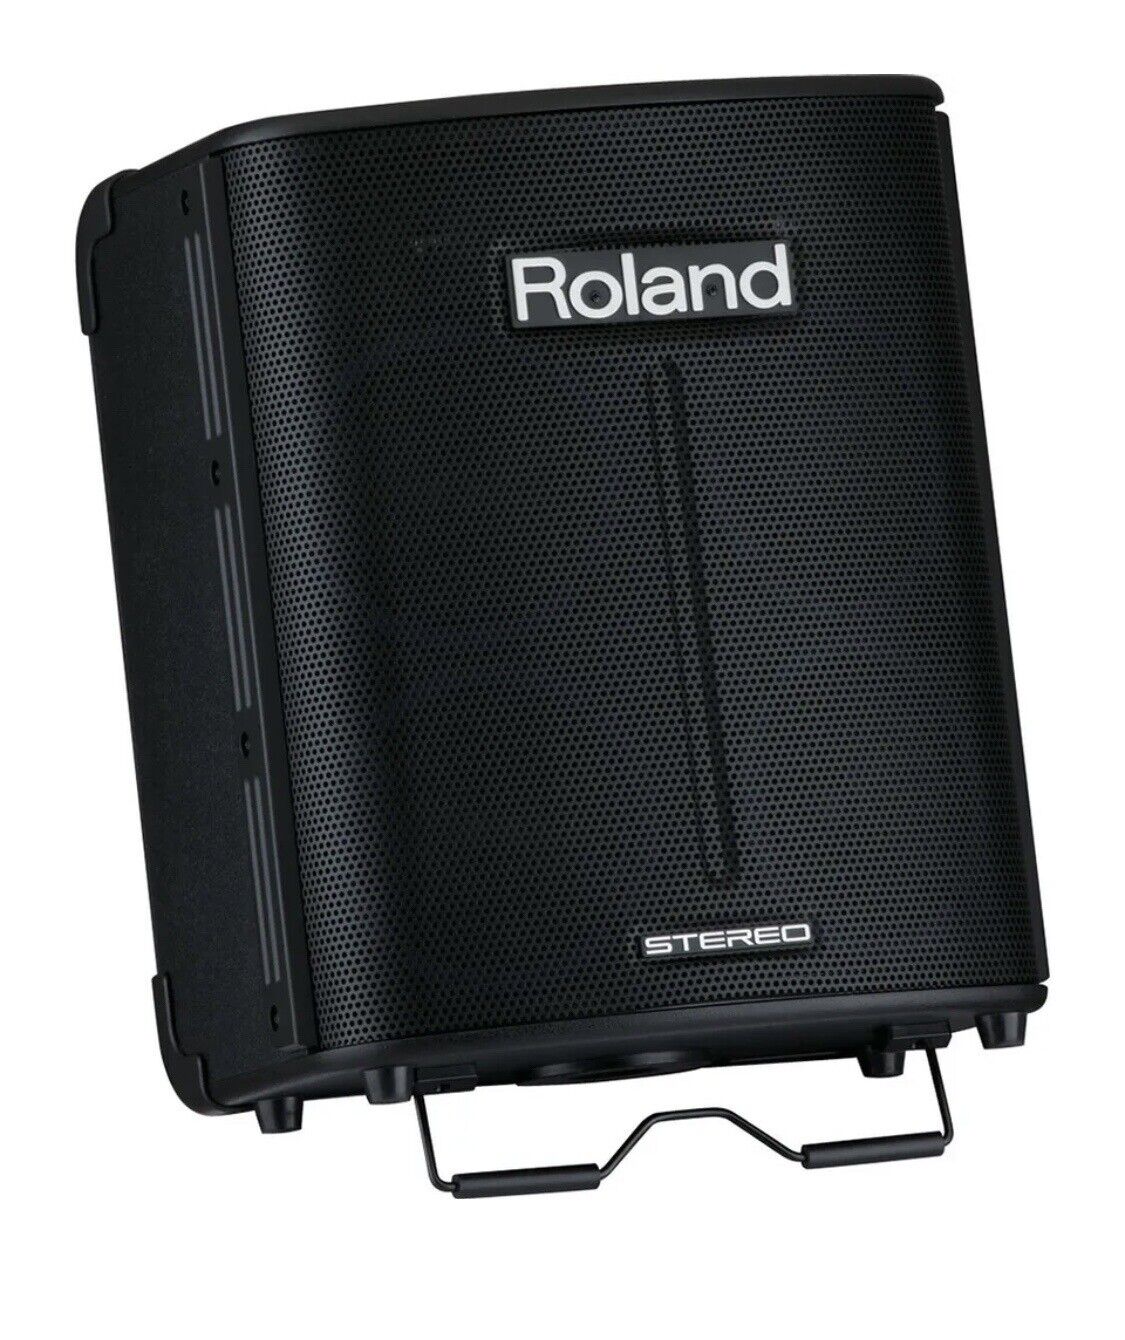 Roland BA-330 Portable Stereo Digital PA System, Battery Powered, 6.5\'\' Speakers